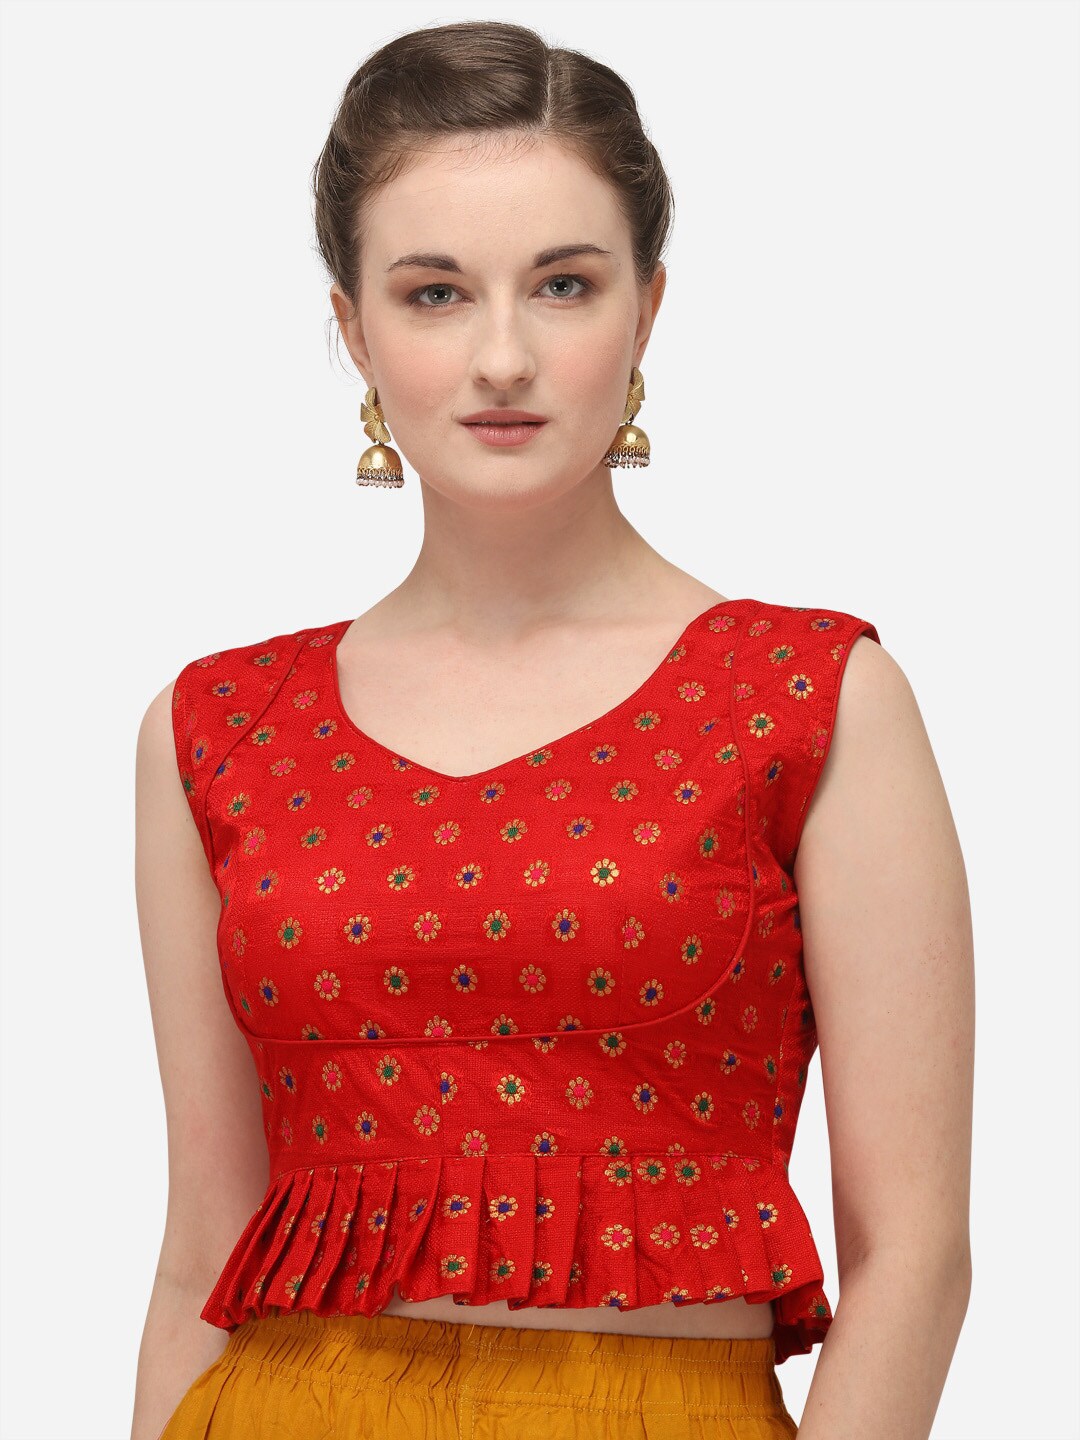 Amrutam Fab Women Red & Gold-Coloured Woven Design Jacquard Saree Blouse Price in India